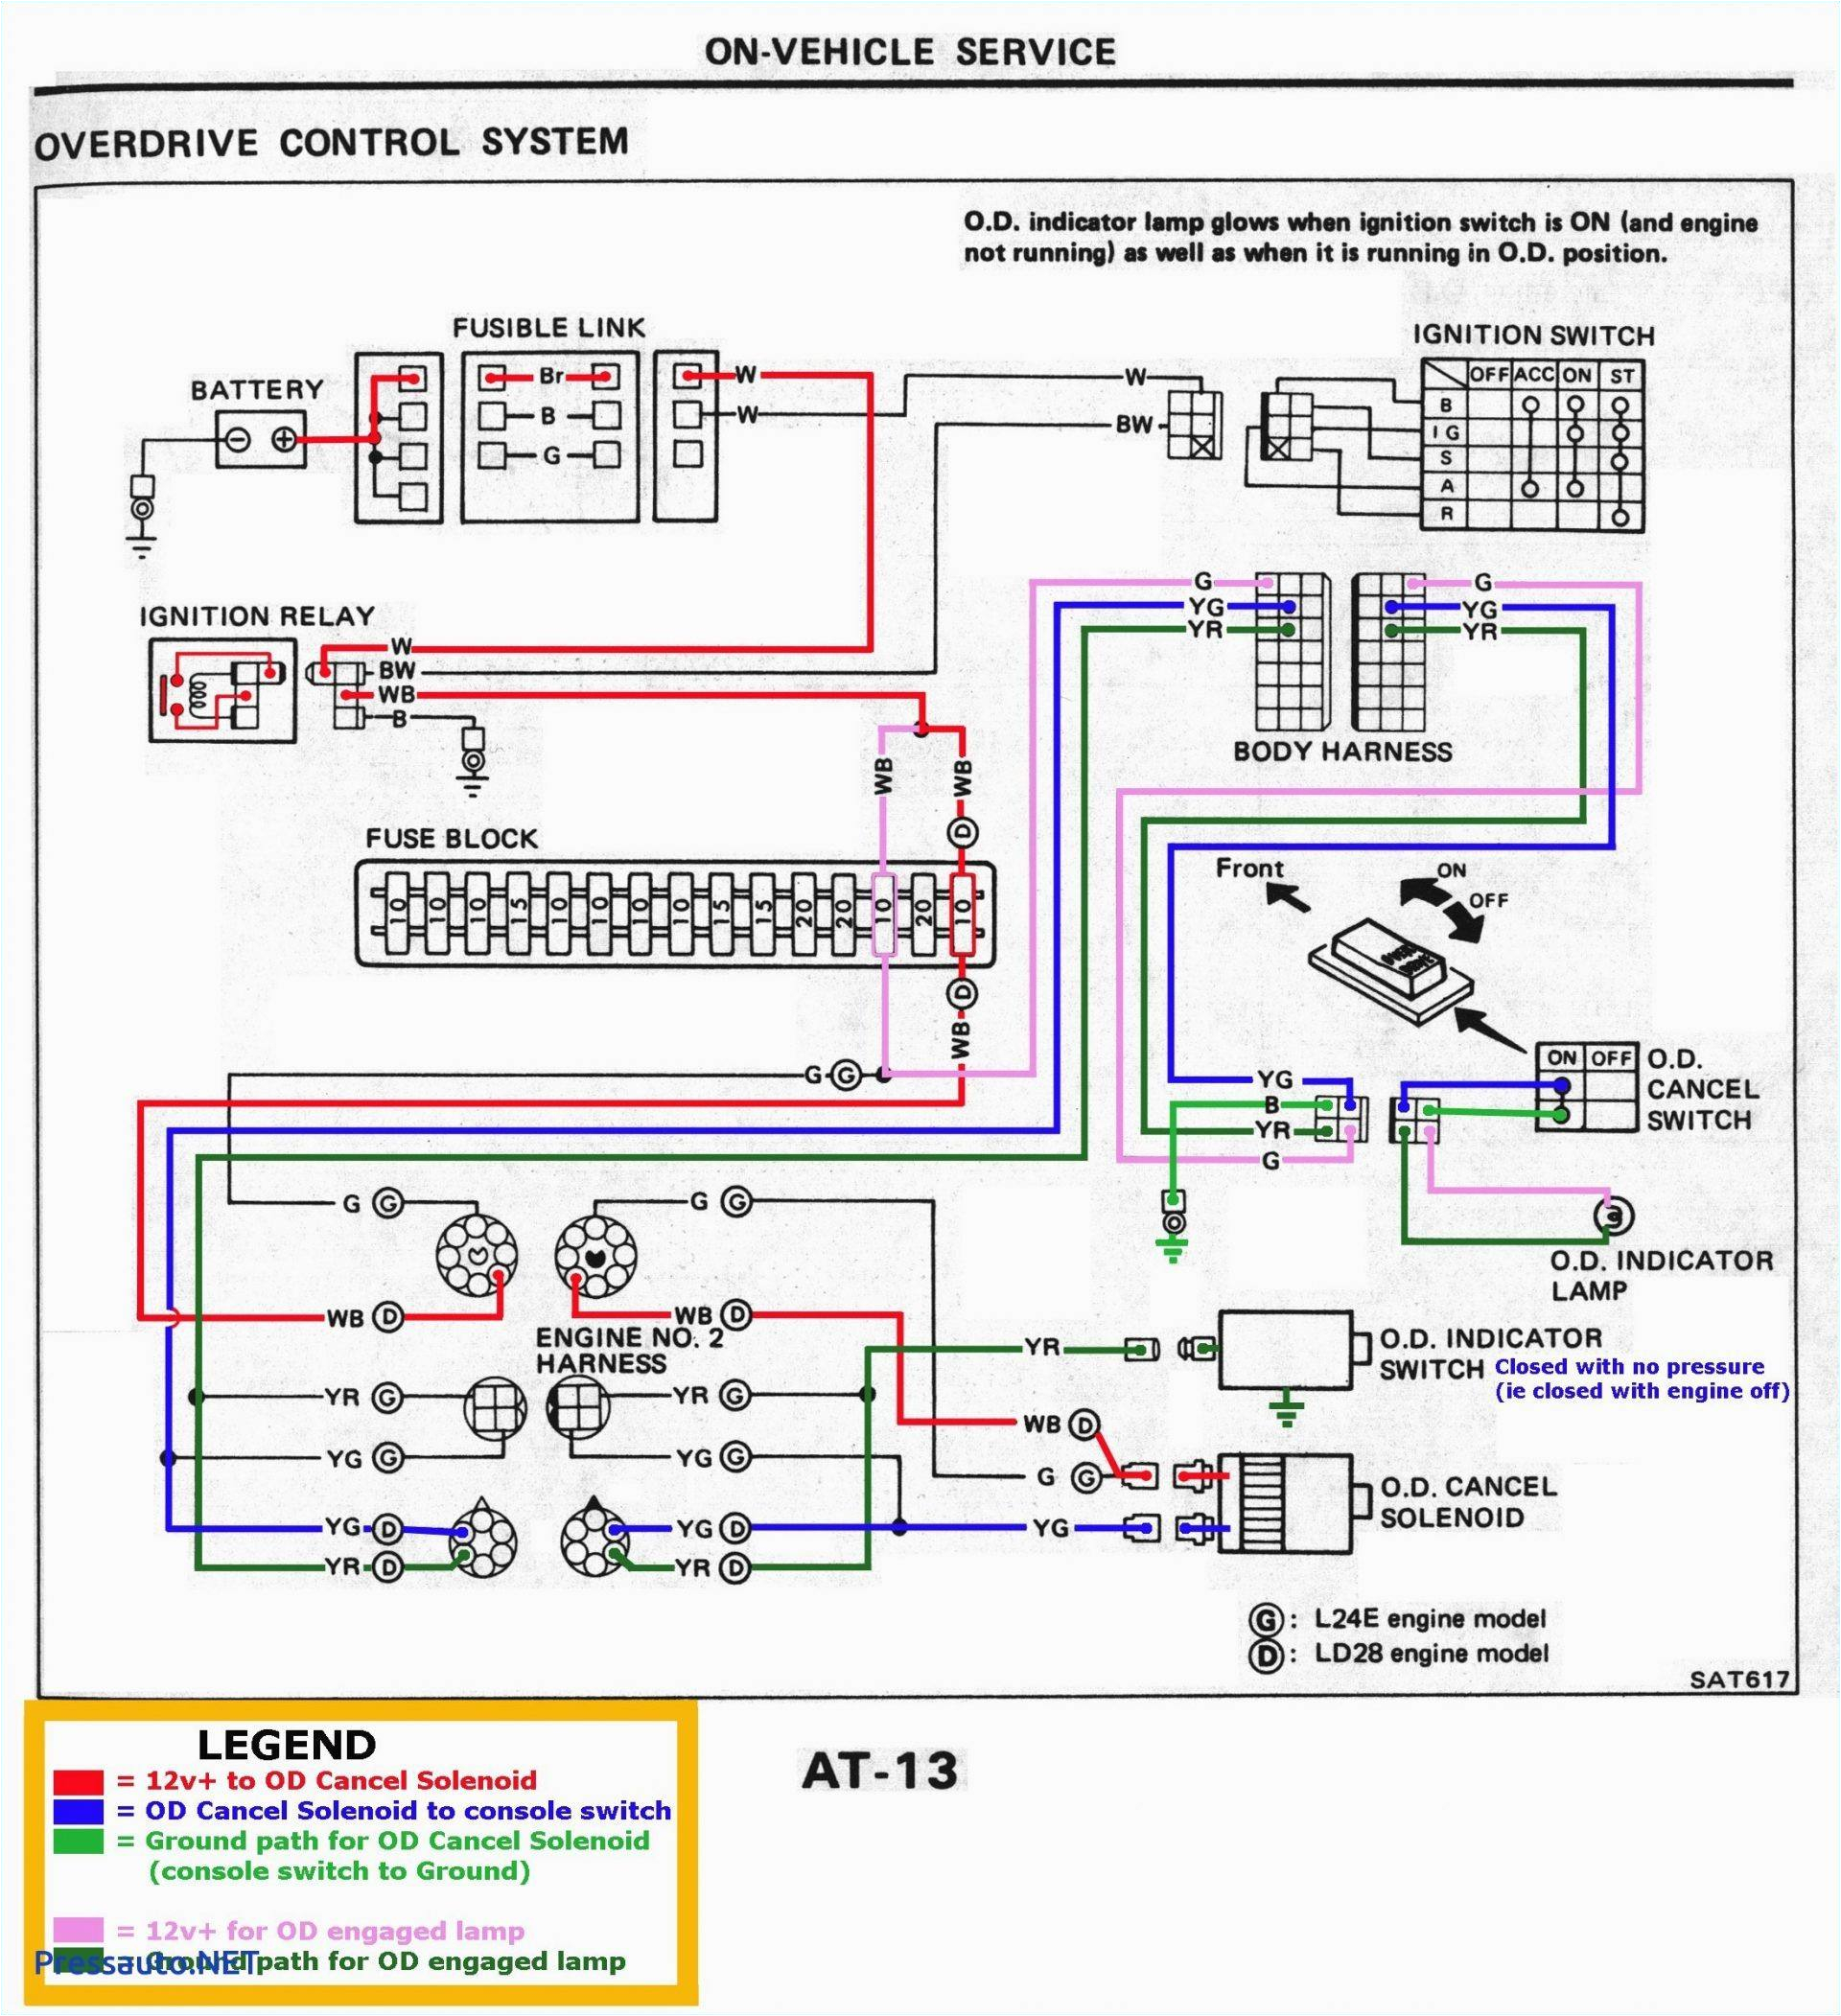 wiring diagram for 2002 chevy silverado 1500 get free image about wiring diagram for 2002 chevy silverado 1500 get free image about